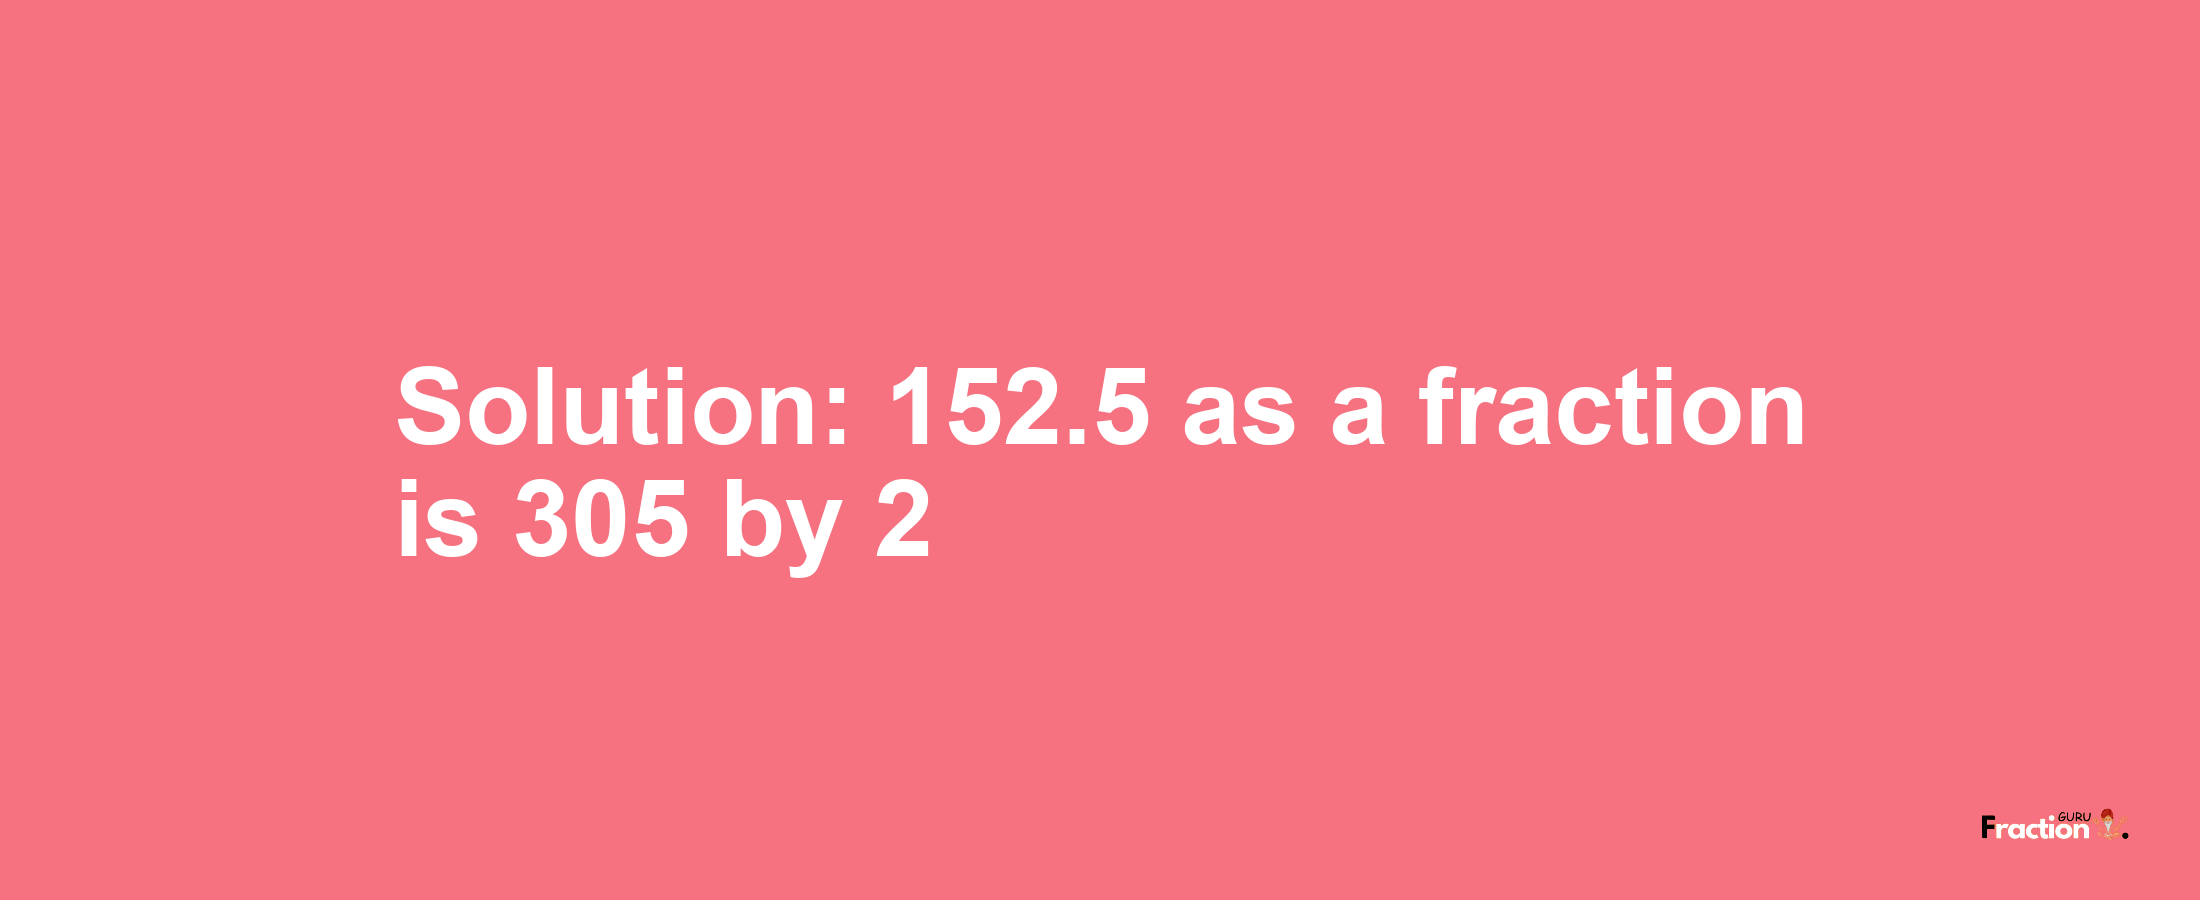 Solution:152.5 as a fraction is 305/2